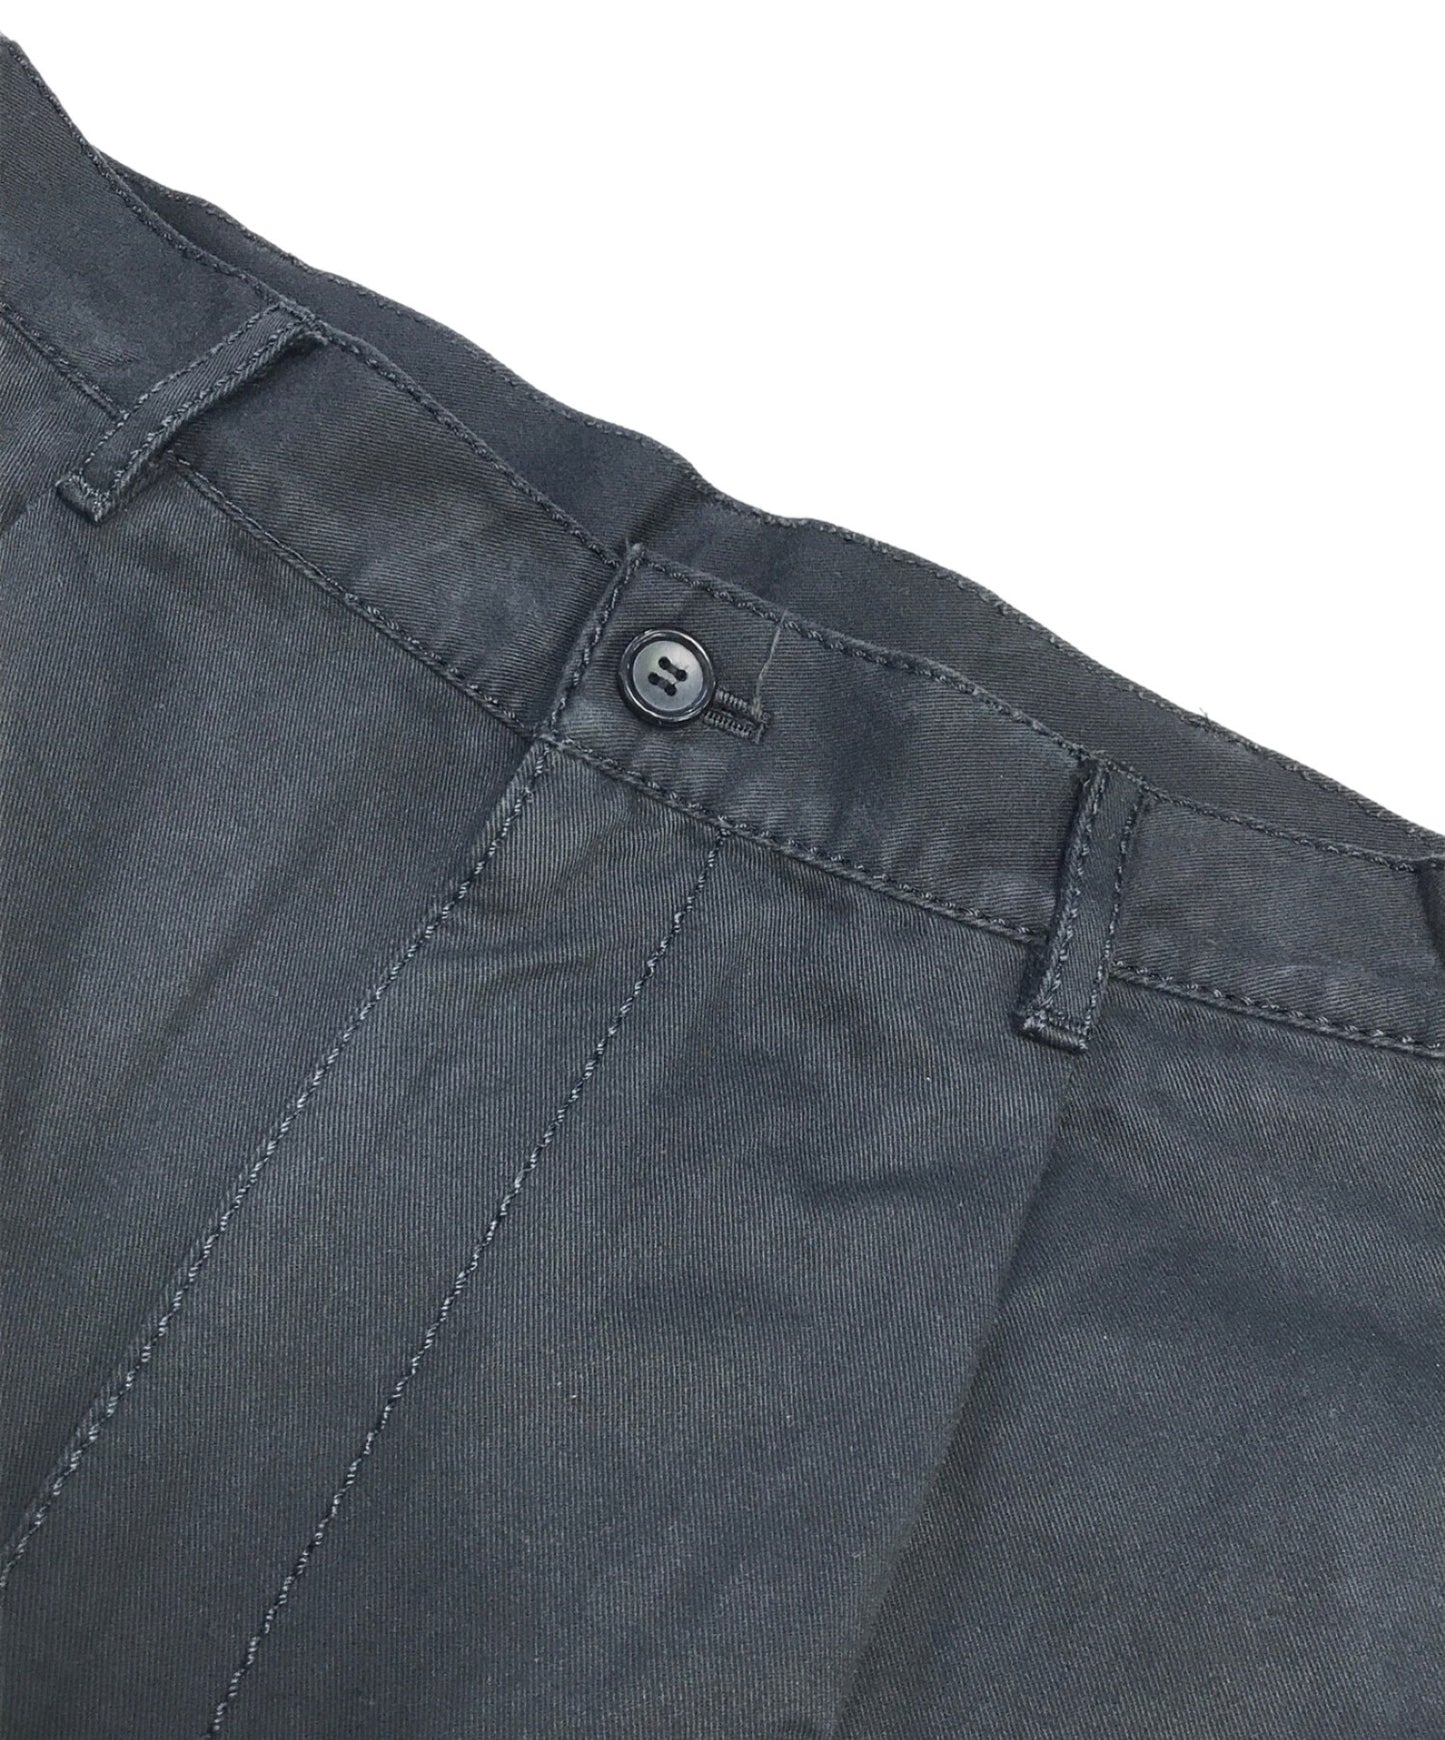 Comme des Garcons Homme Fat Stuck Tuck Chino Pants HF-P015